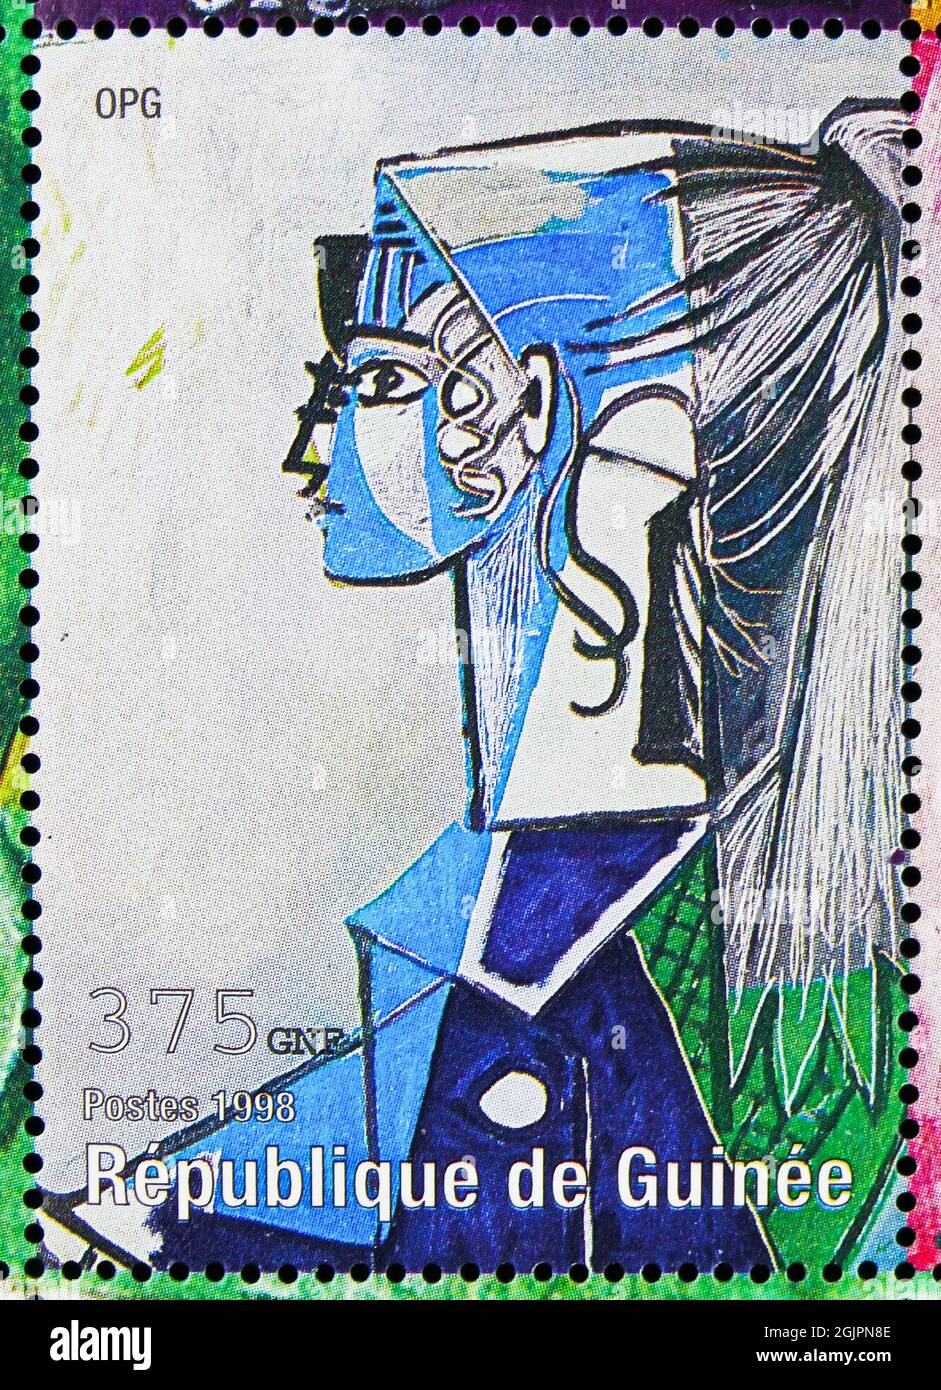 MOSCOW, RUSSIA - APRIL 17, 2021: Postage stamp printed in Cinderellas shows Pablo Picasso, Portrait of Sylvette David, Guinea serie, circa 1998 Stock Photo